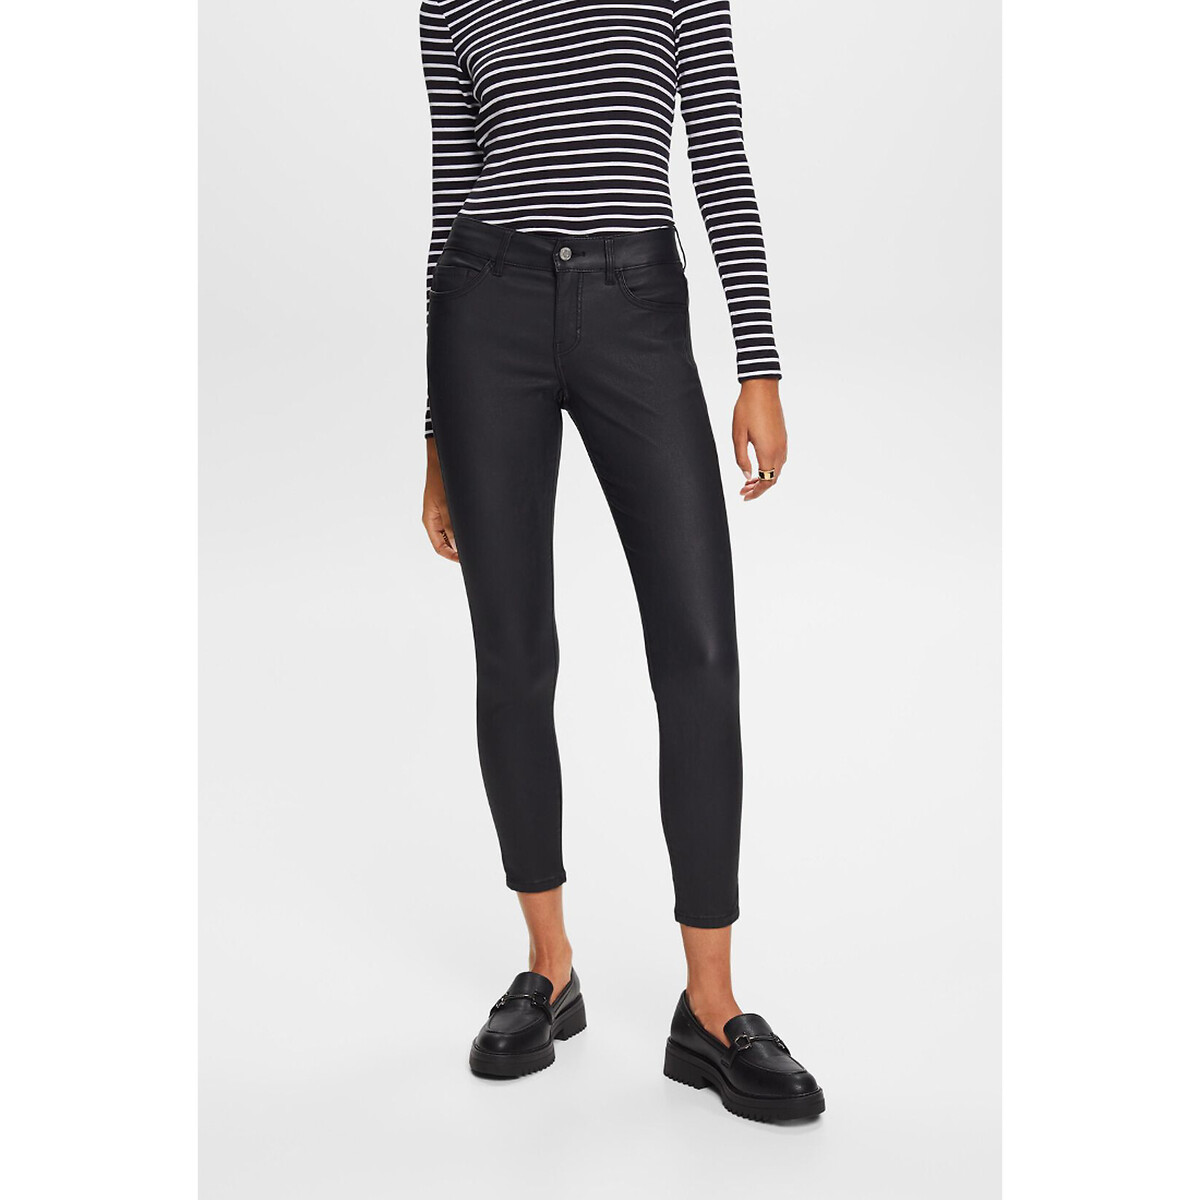 Image of Coated Skinny Trousers, Length 30"